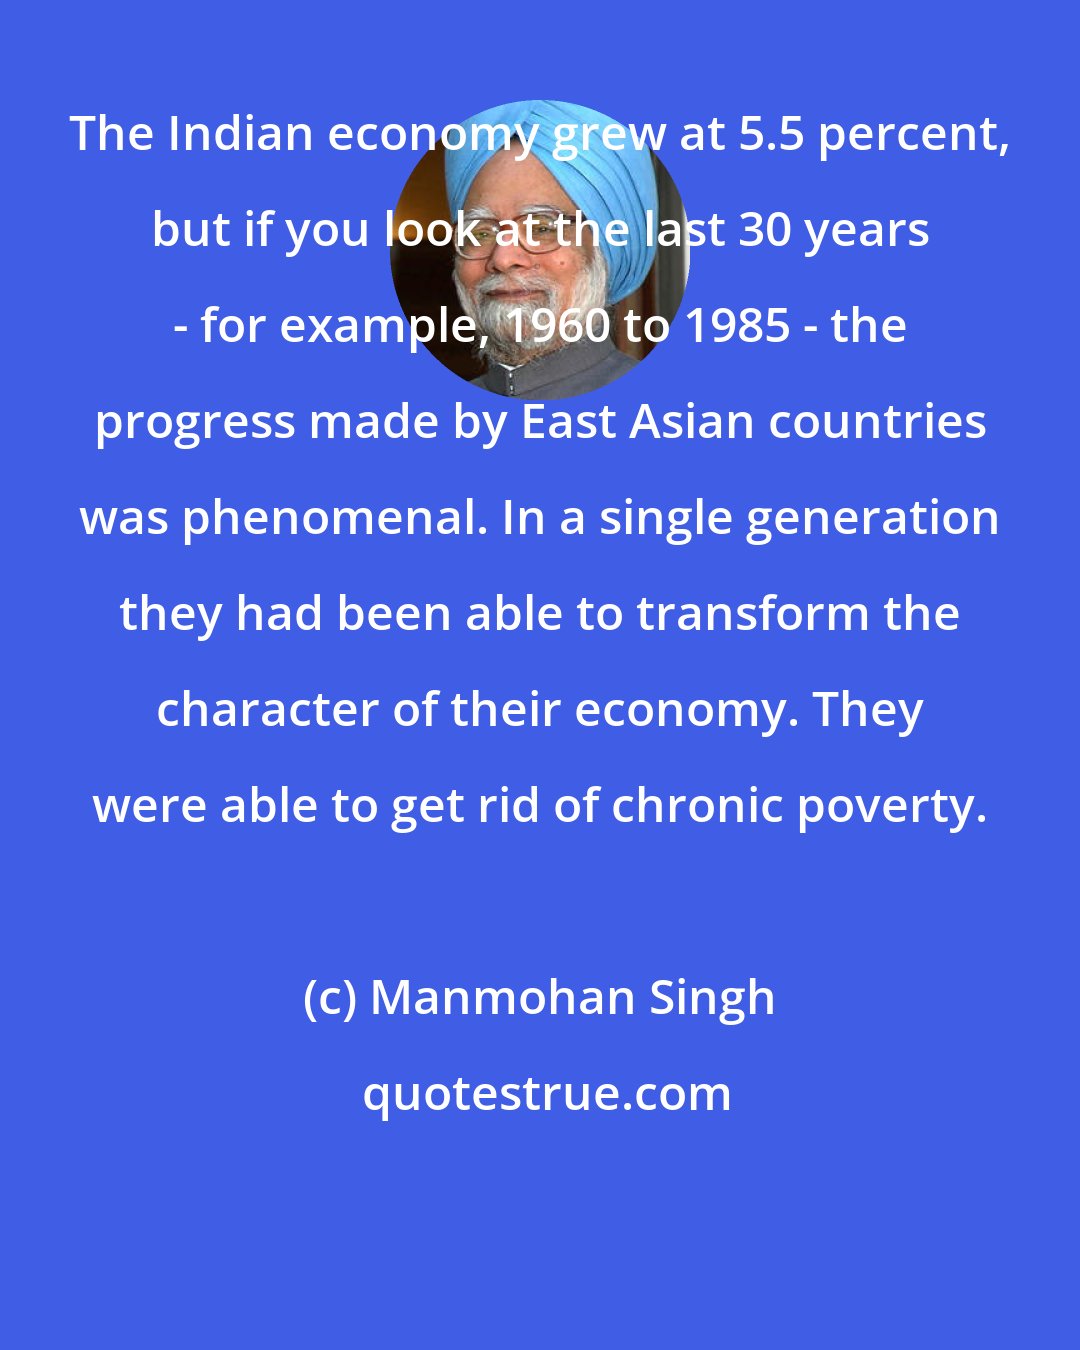 Manmohan Singh: The Indian economy grew at 5.5 percent, but if you look at the last 30 years - for example, 1960 to 1985 - the progress made by East Asian countries was phenomenal. In a single generation they had been able to transform the character of their economy. They were able to get rid of chronic poverty.